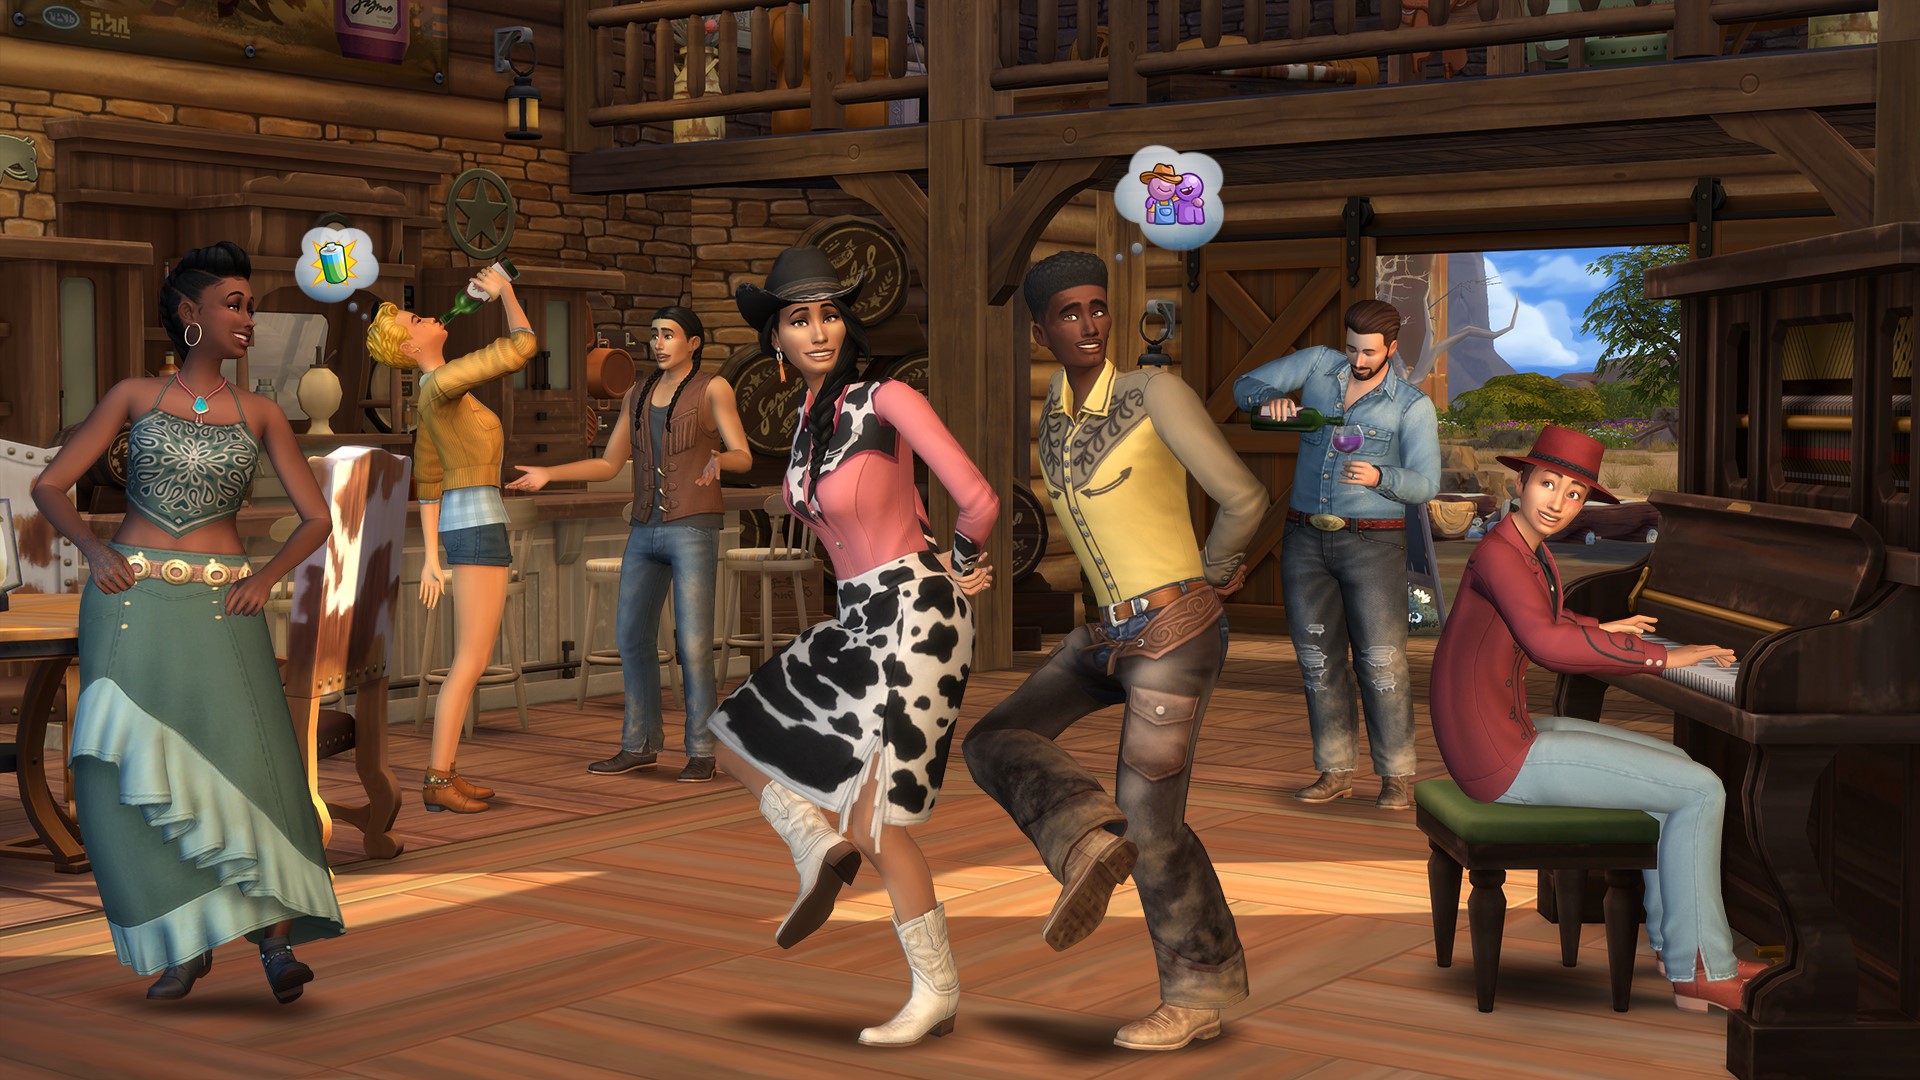 The Sims 4 Horse Ranch: Official Gameplay Trailer 